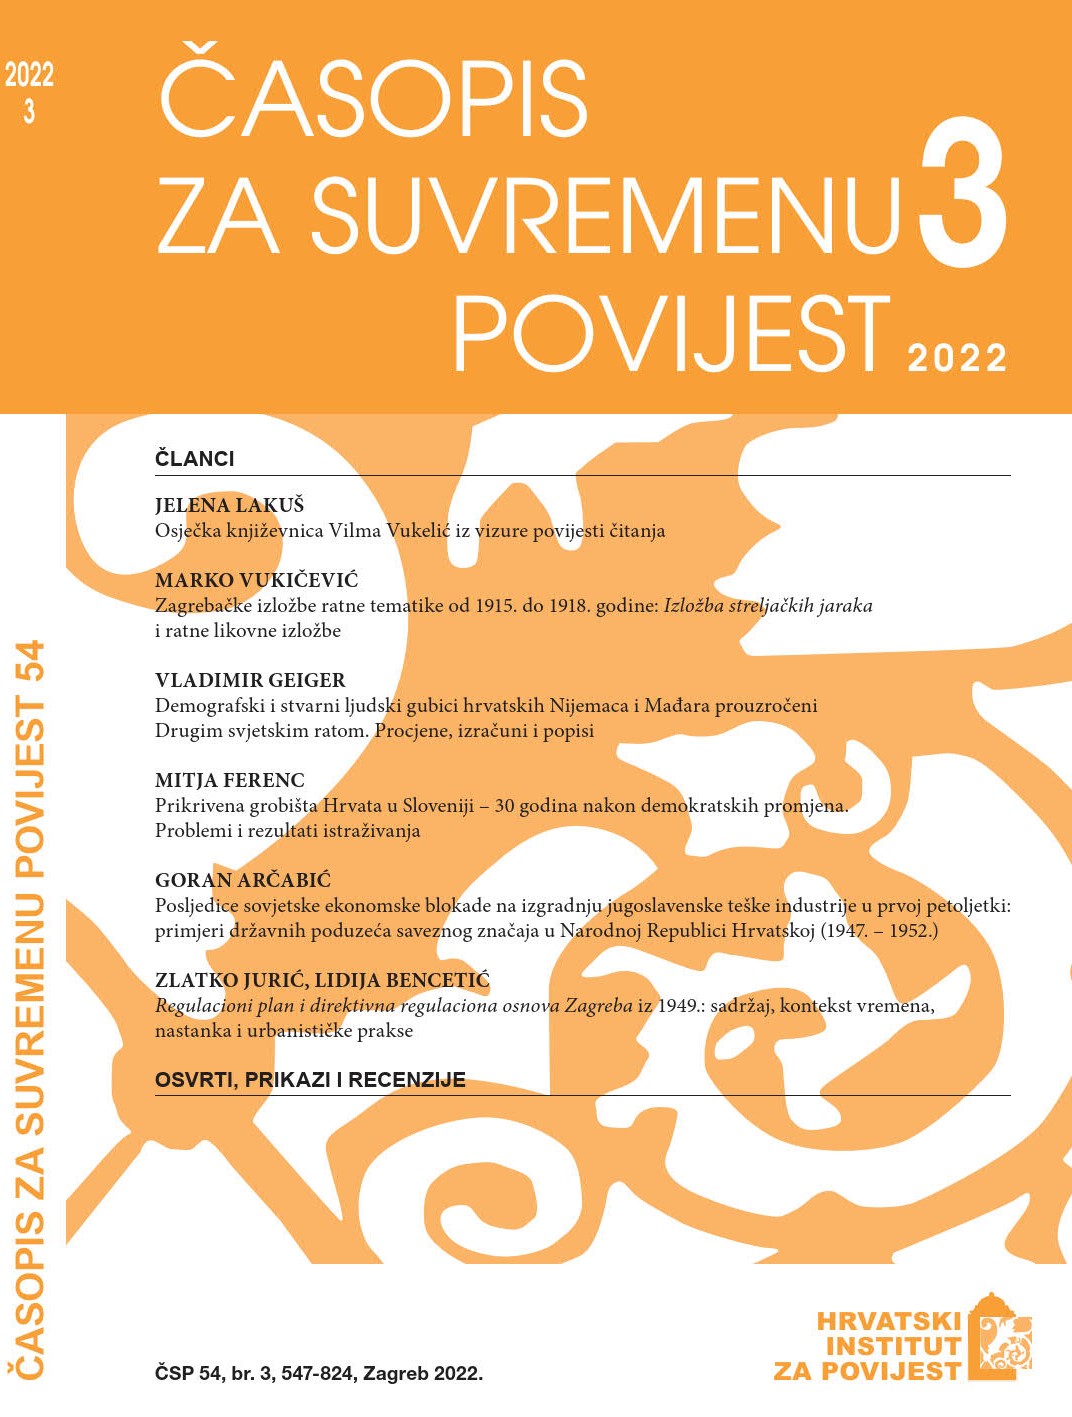 The Consequences of the Soviet Economic Blockade on the Construction of Yugoslav Heavy Industry in the First Five-Year Plan Period: Examples of State-Owned Enterprises of Federal Importance in the People’s Republic of Croatia (1947–1952) Cover Image